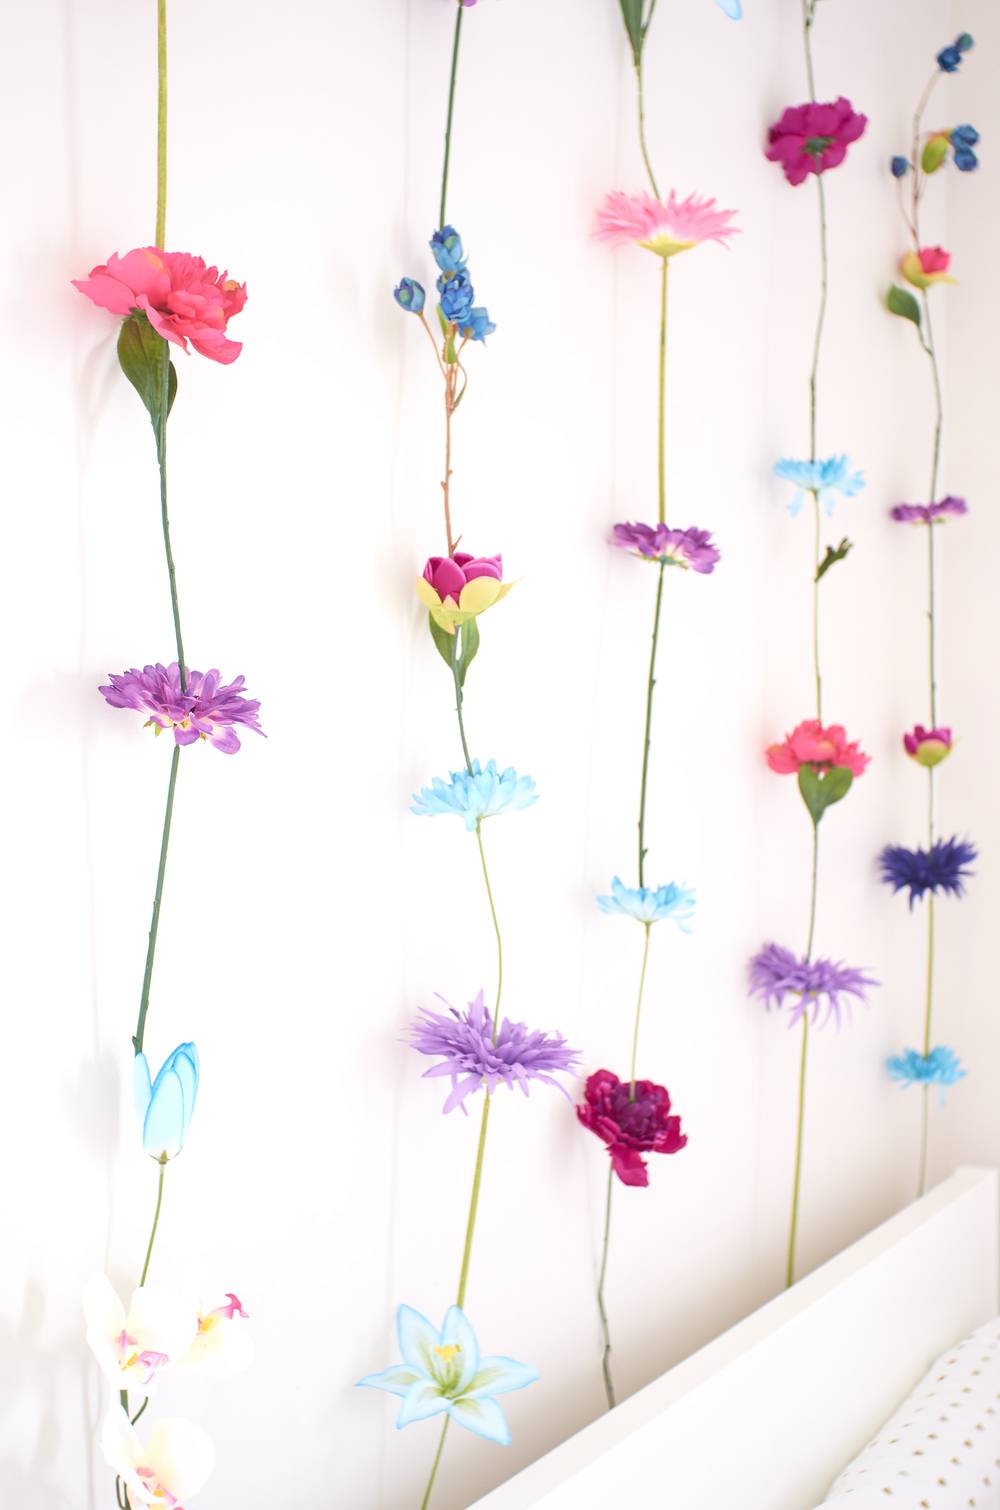 Flowers strung in a vertical line hanging down from ceiling.